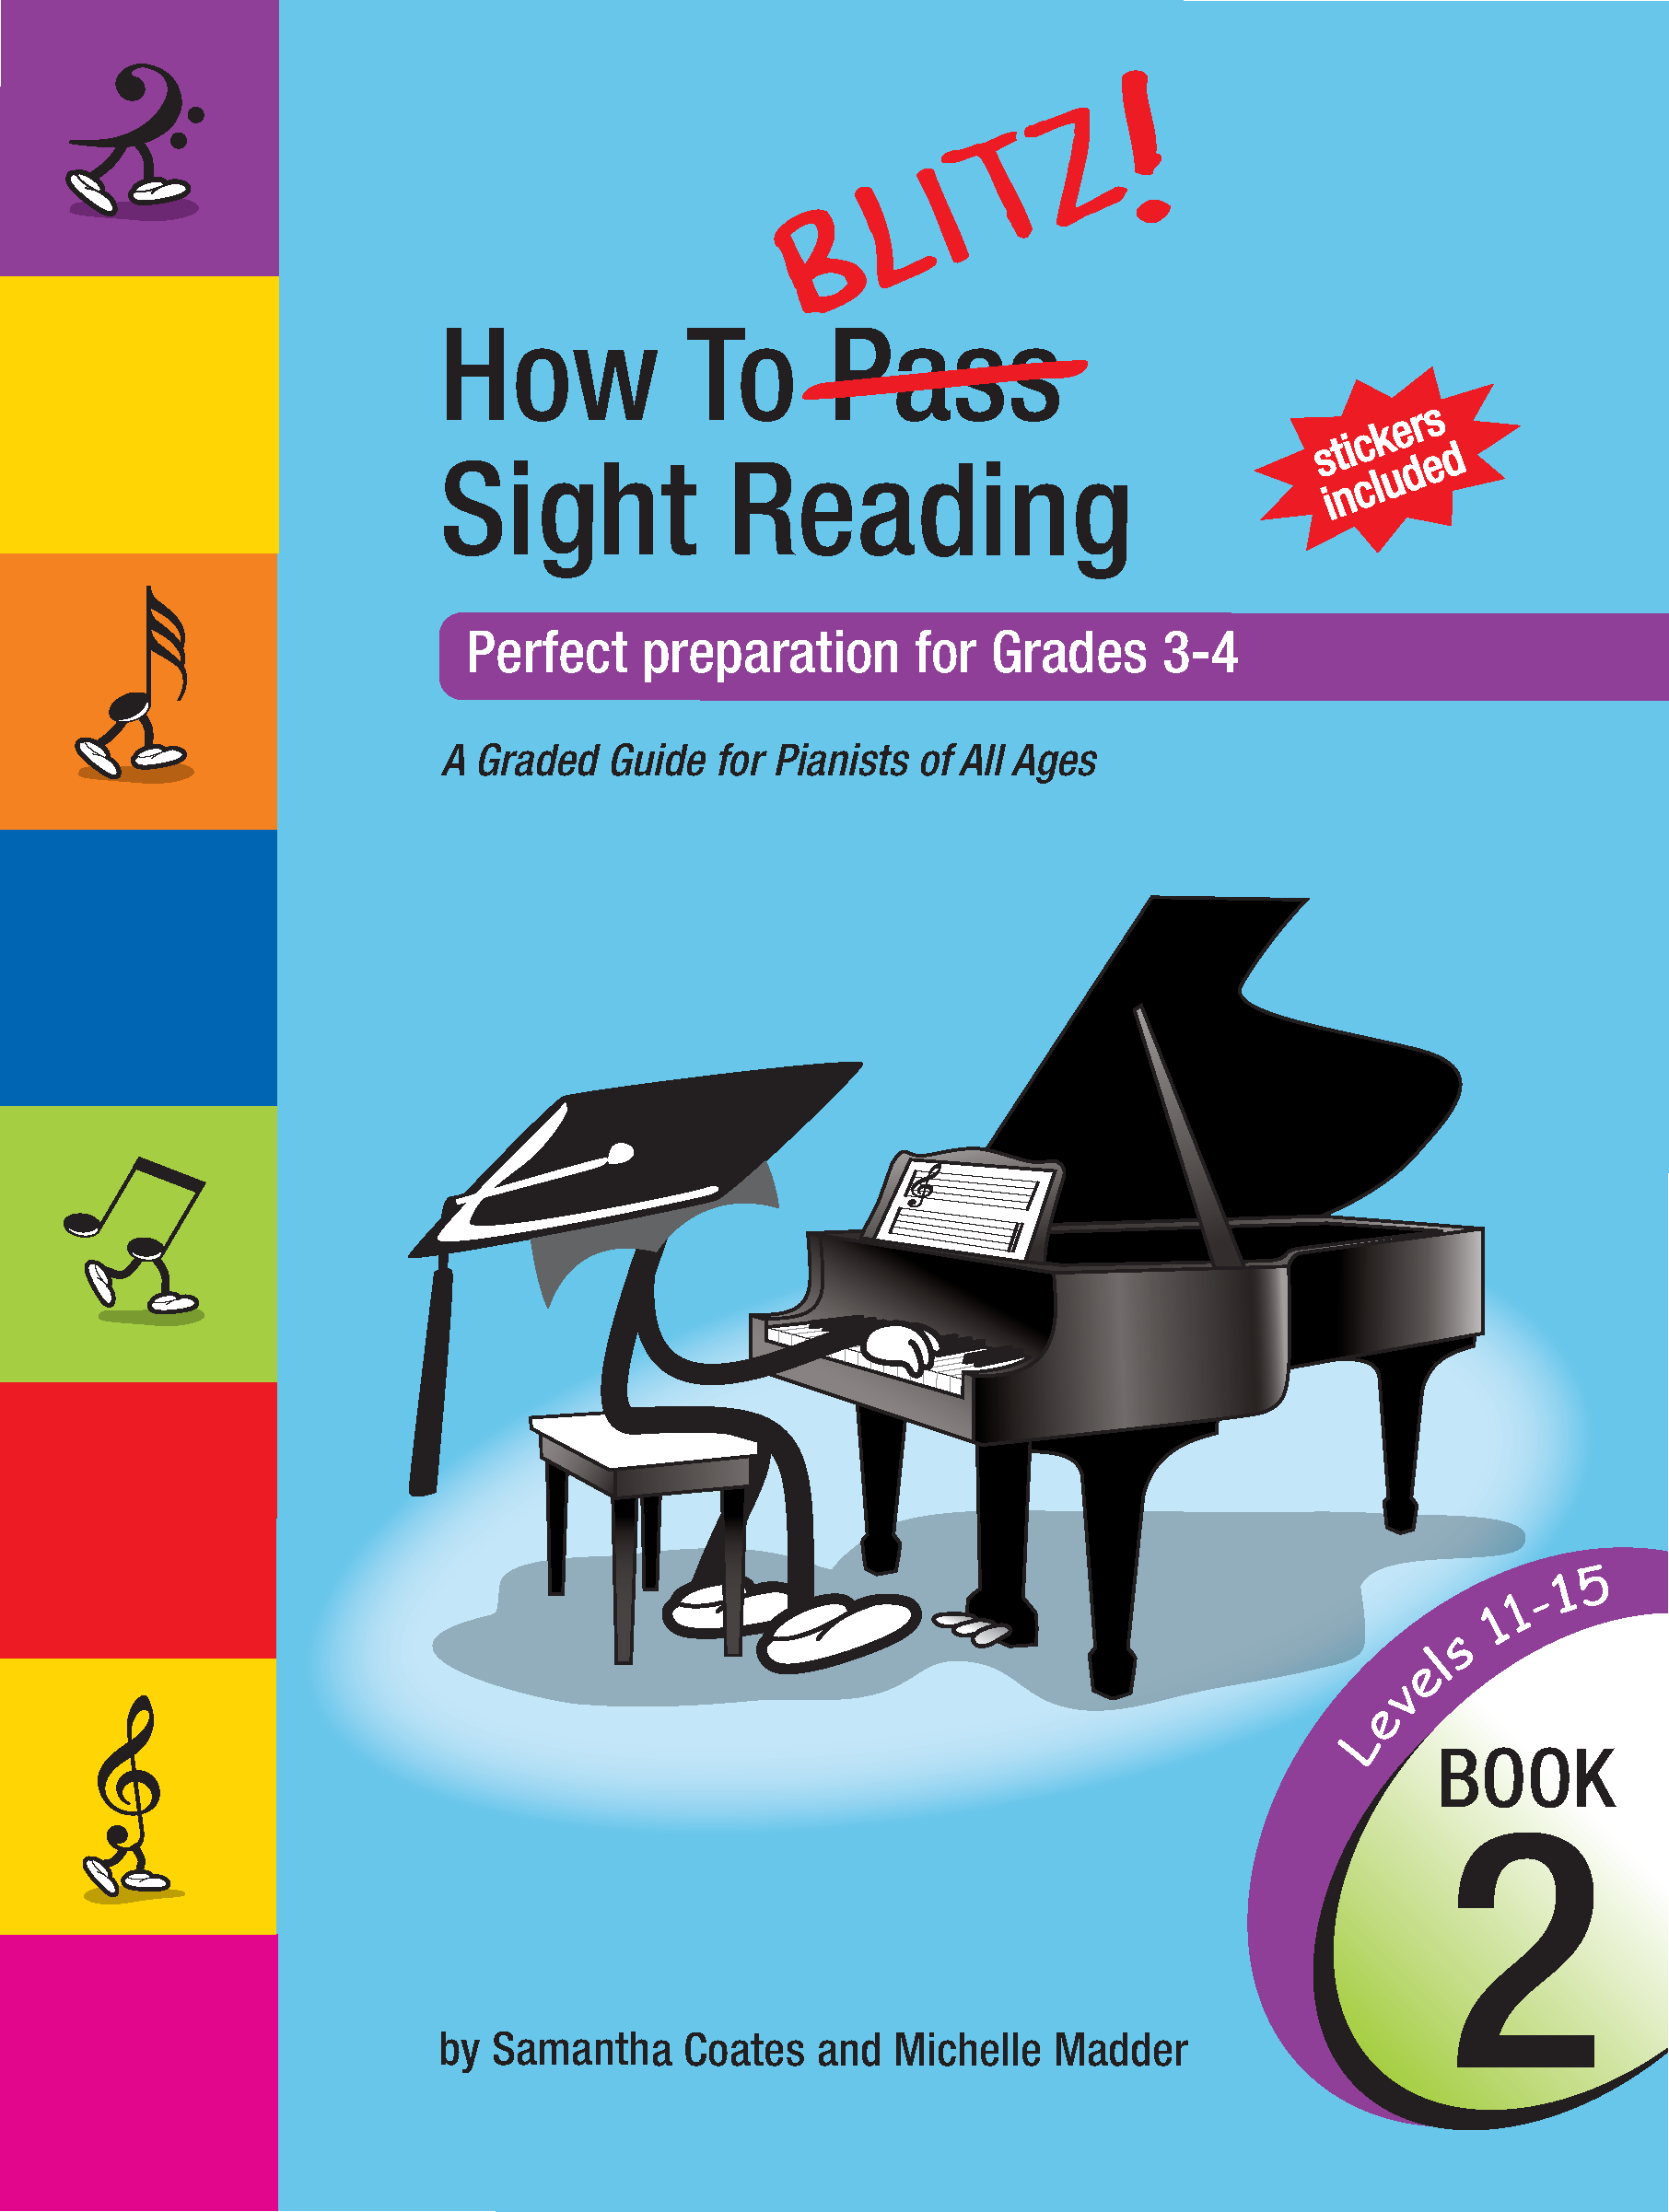 How To Blitz! Sight Reading Book 2